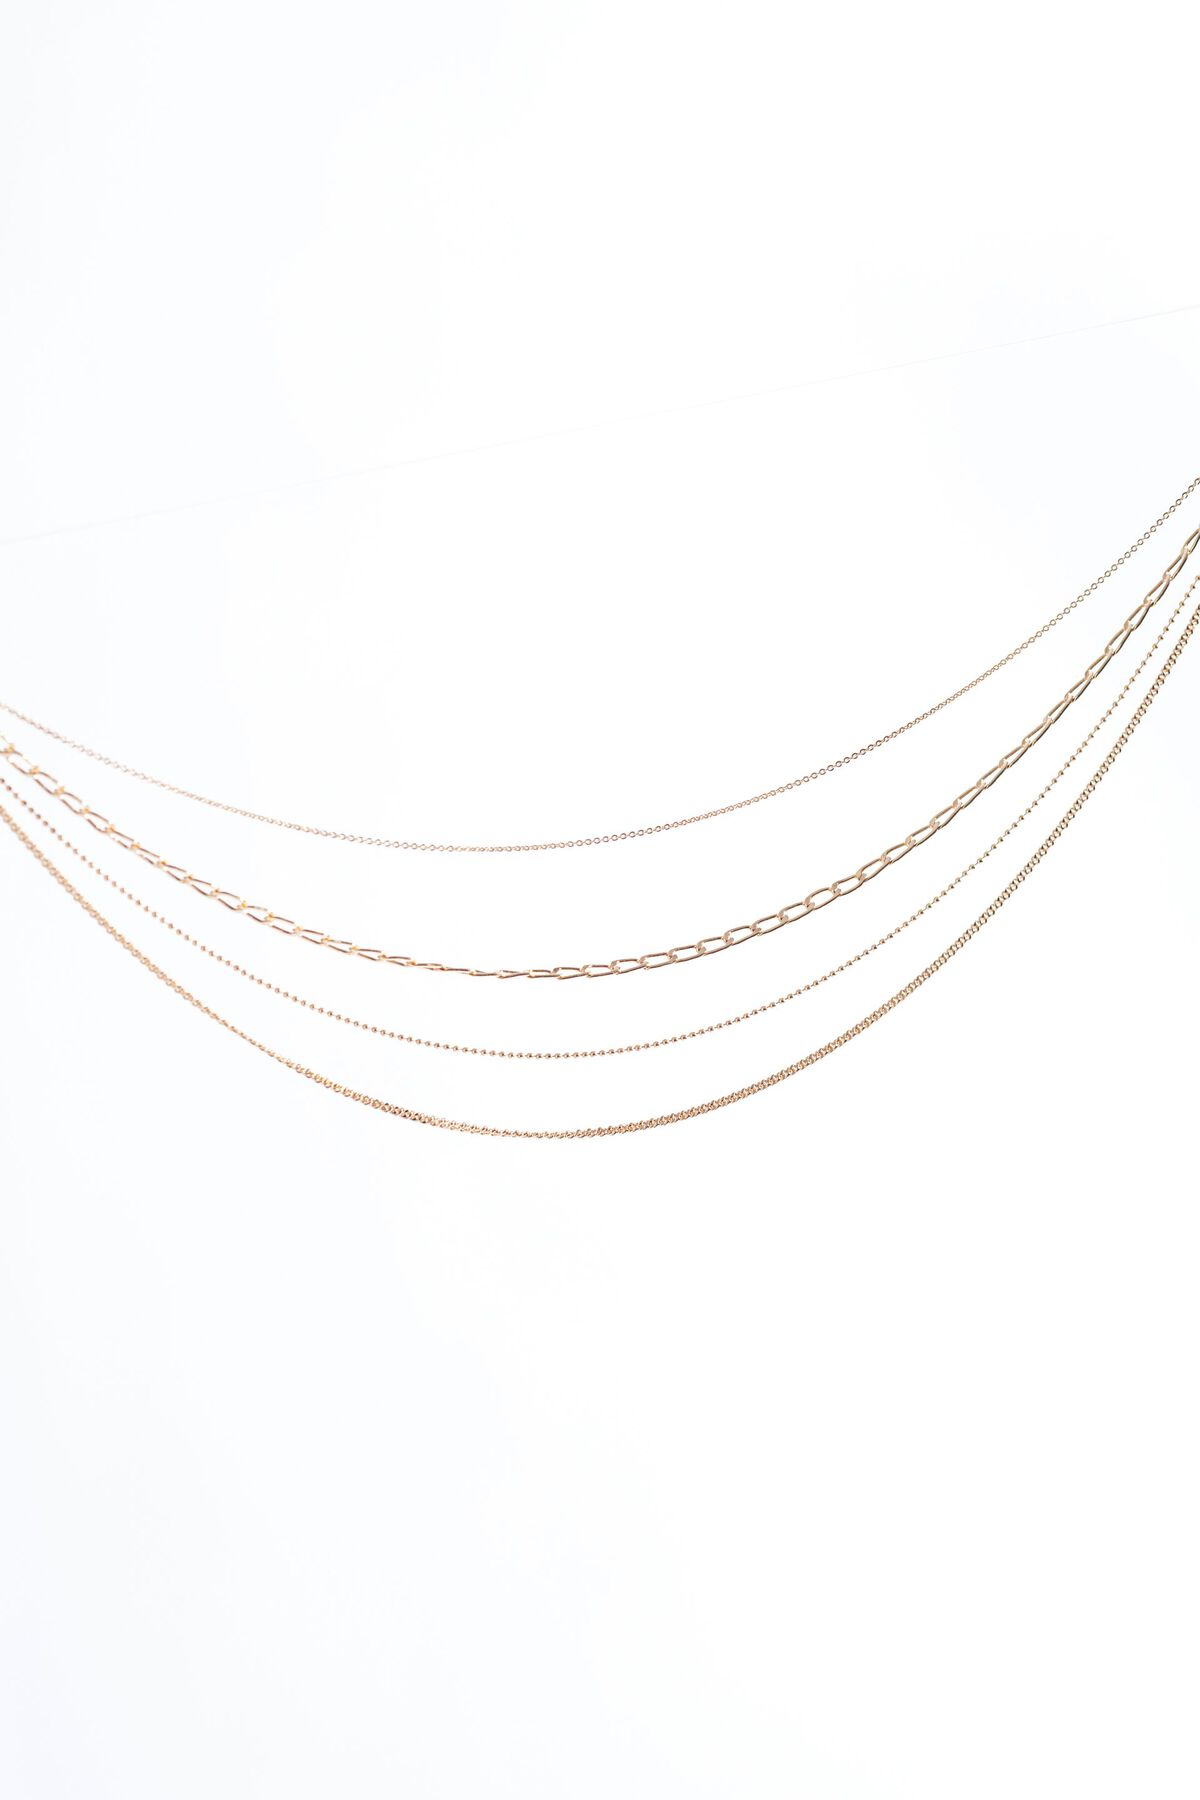 Garage Set of 5 Dainty Chain Necklaces. 1